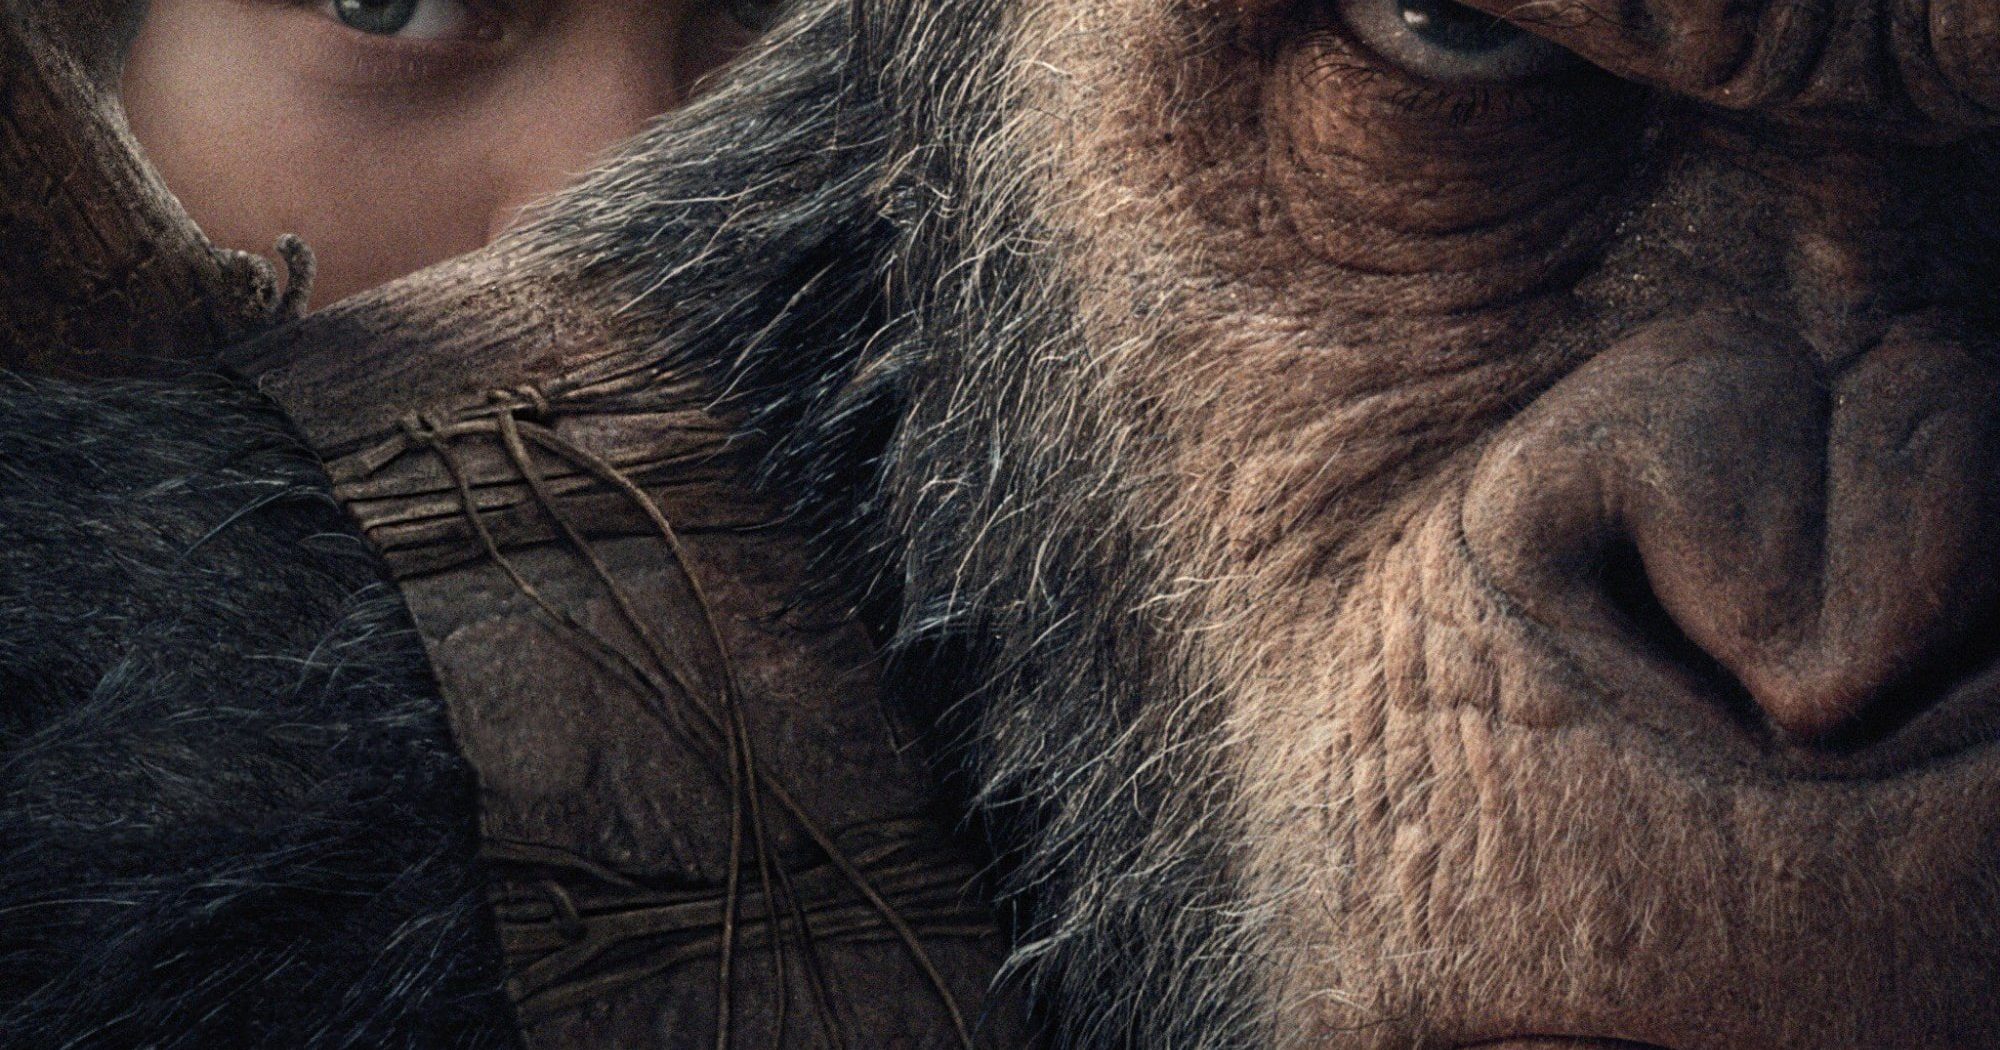 Poster for the movie "War for the Planet of the Apes"